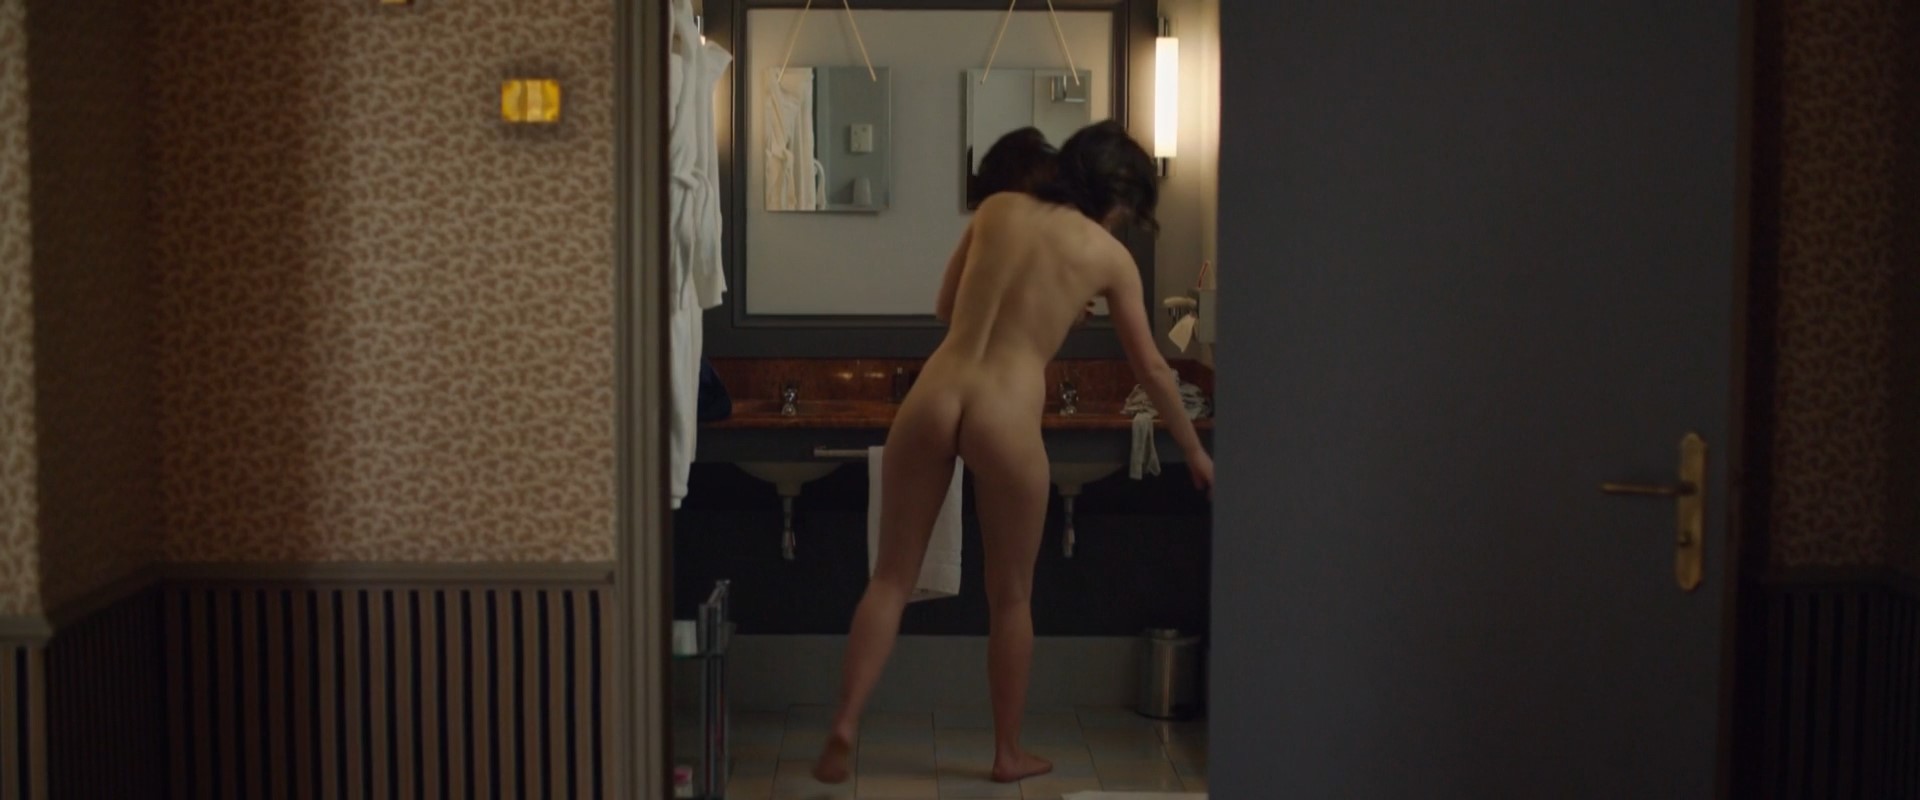 Adгёle exarchopoulos naked